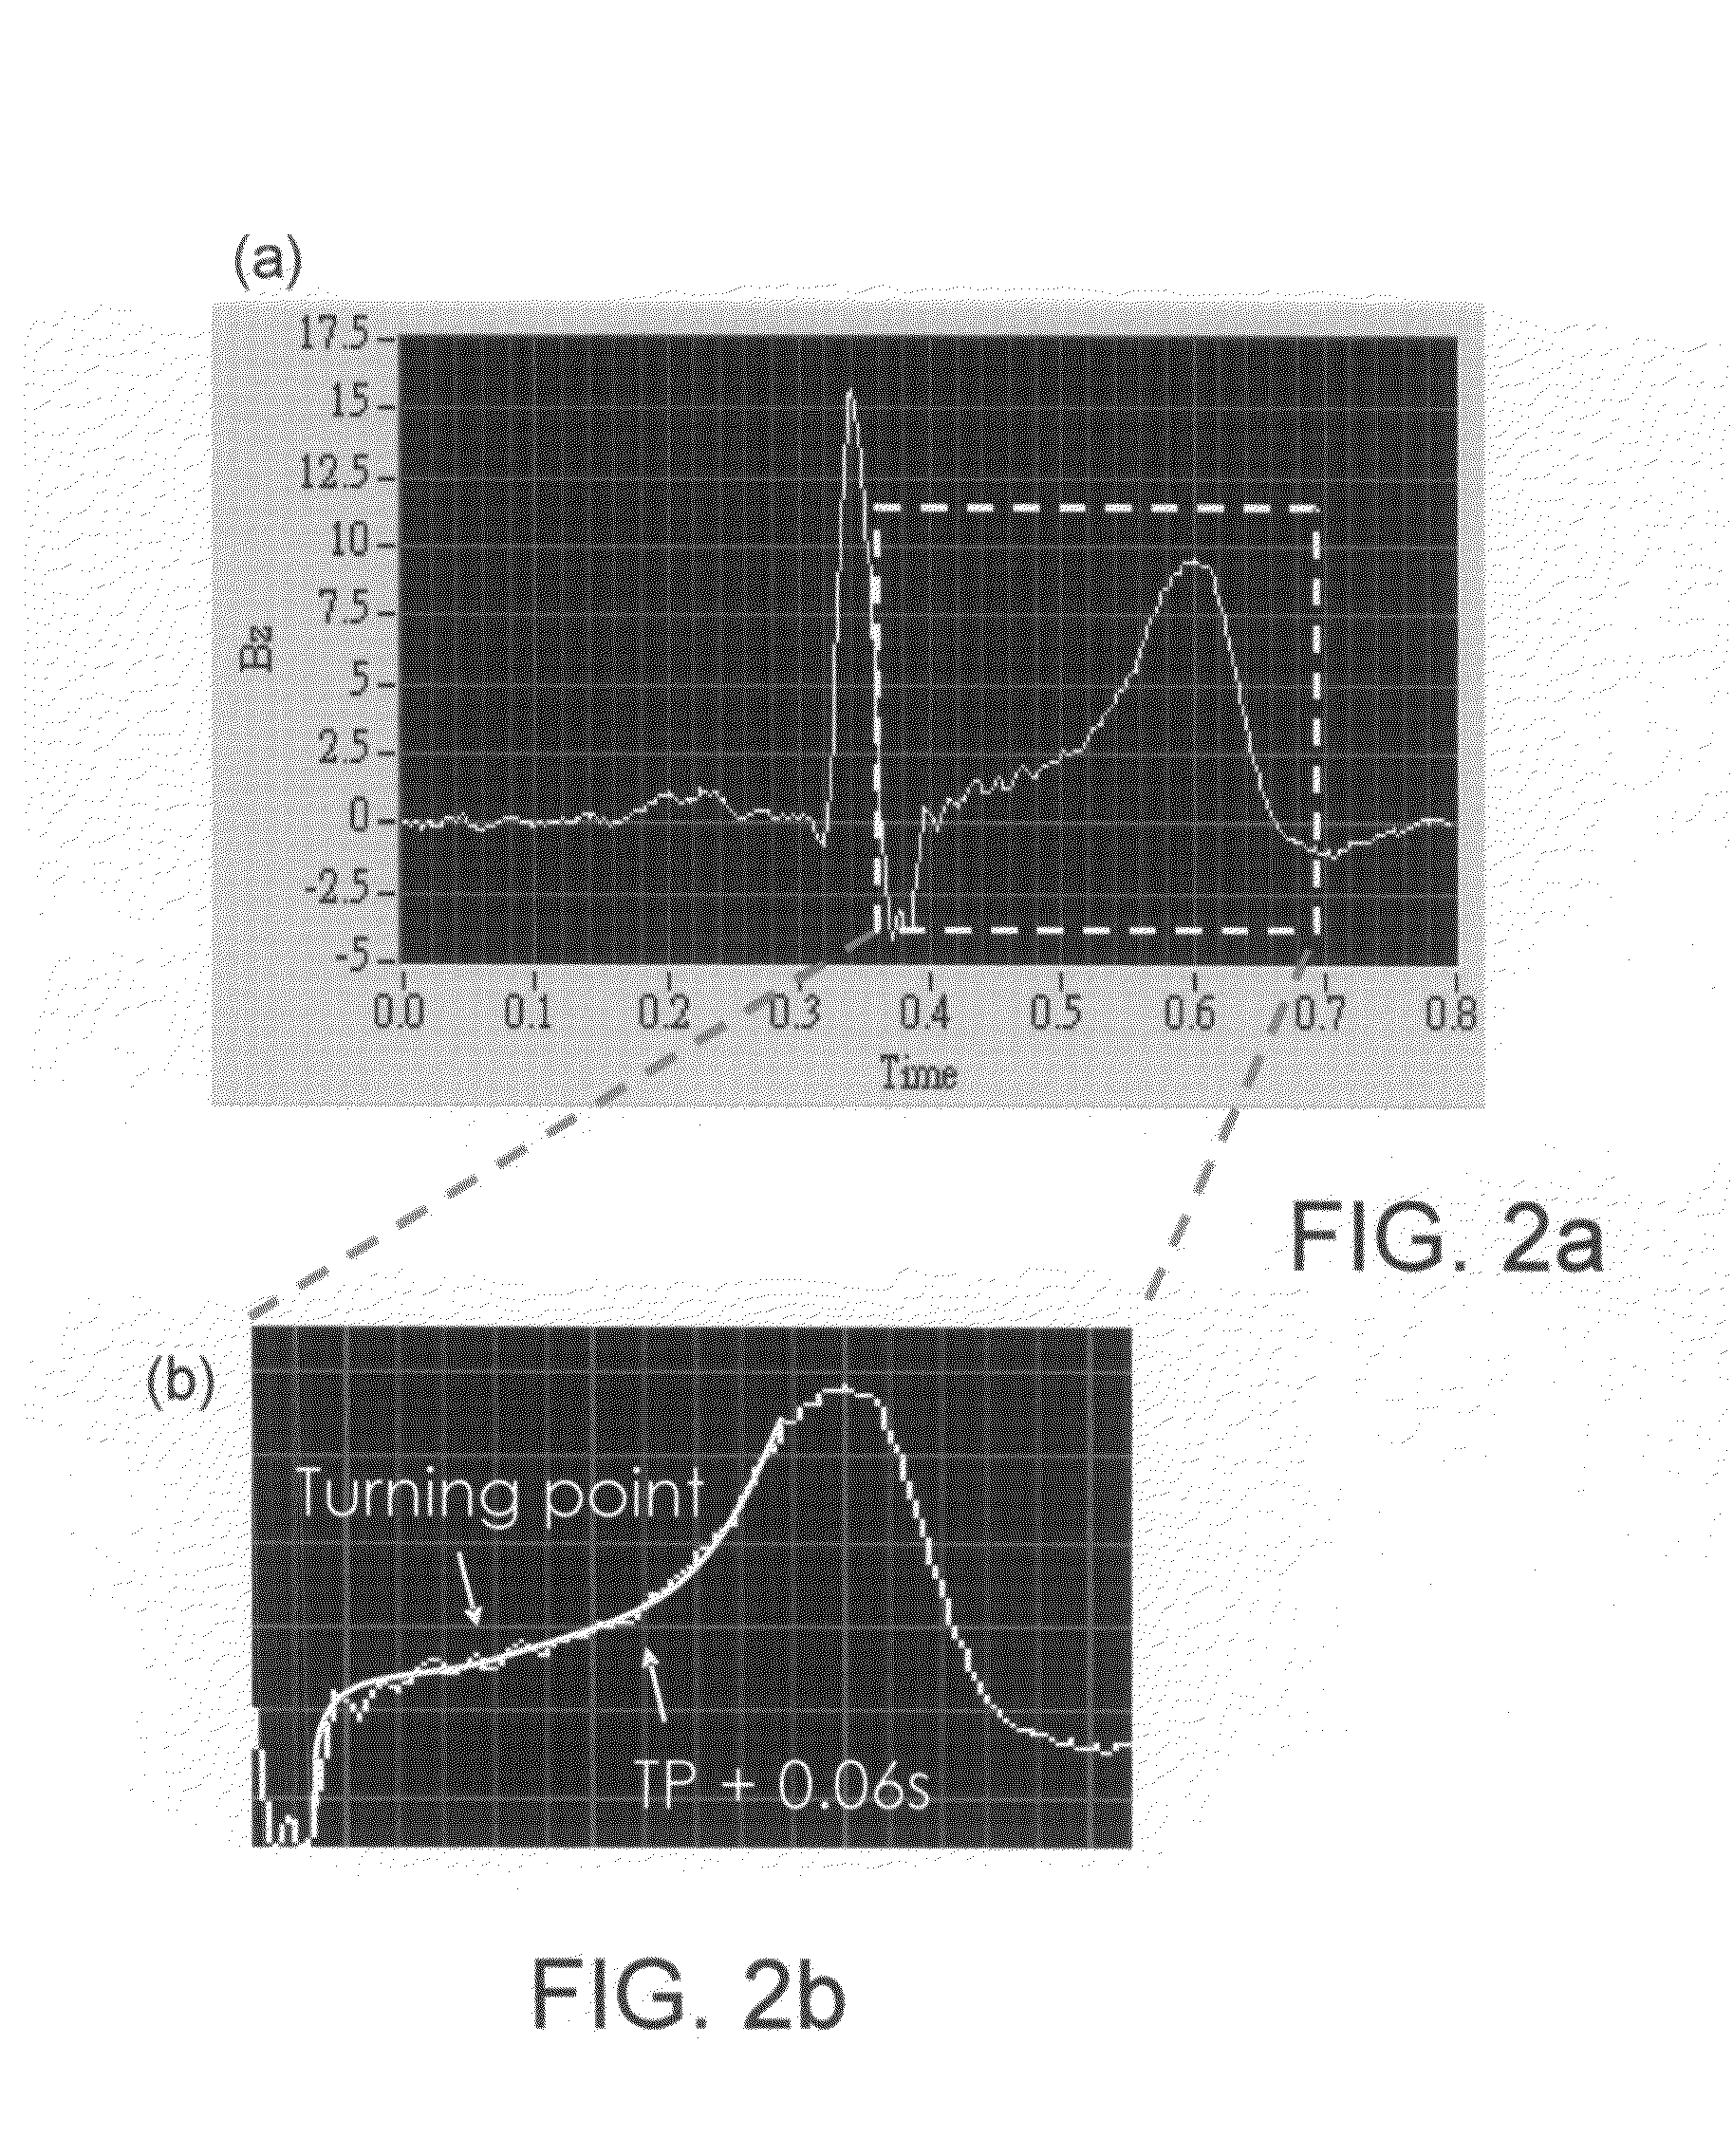 Method of examining dynamic cardiac electromagnetic activity and detection of cardiac functions using results thereof